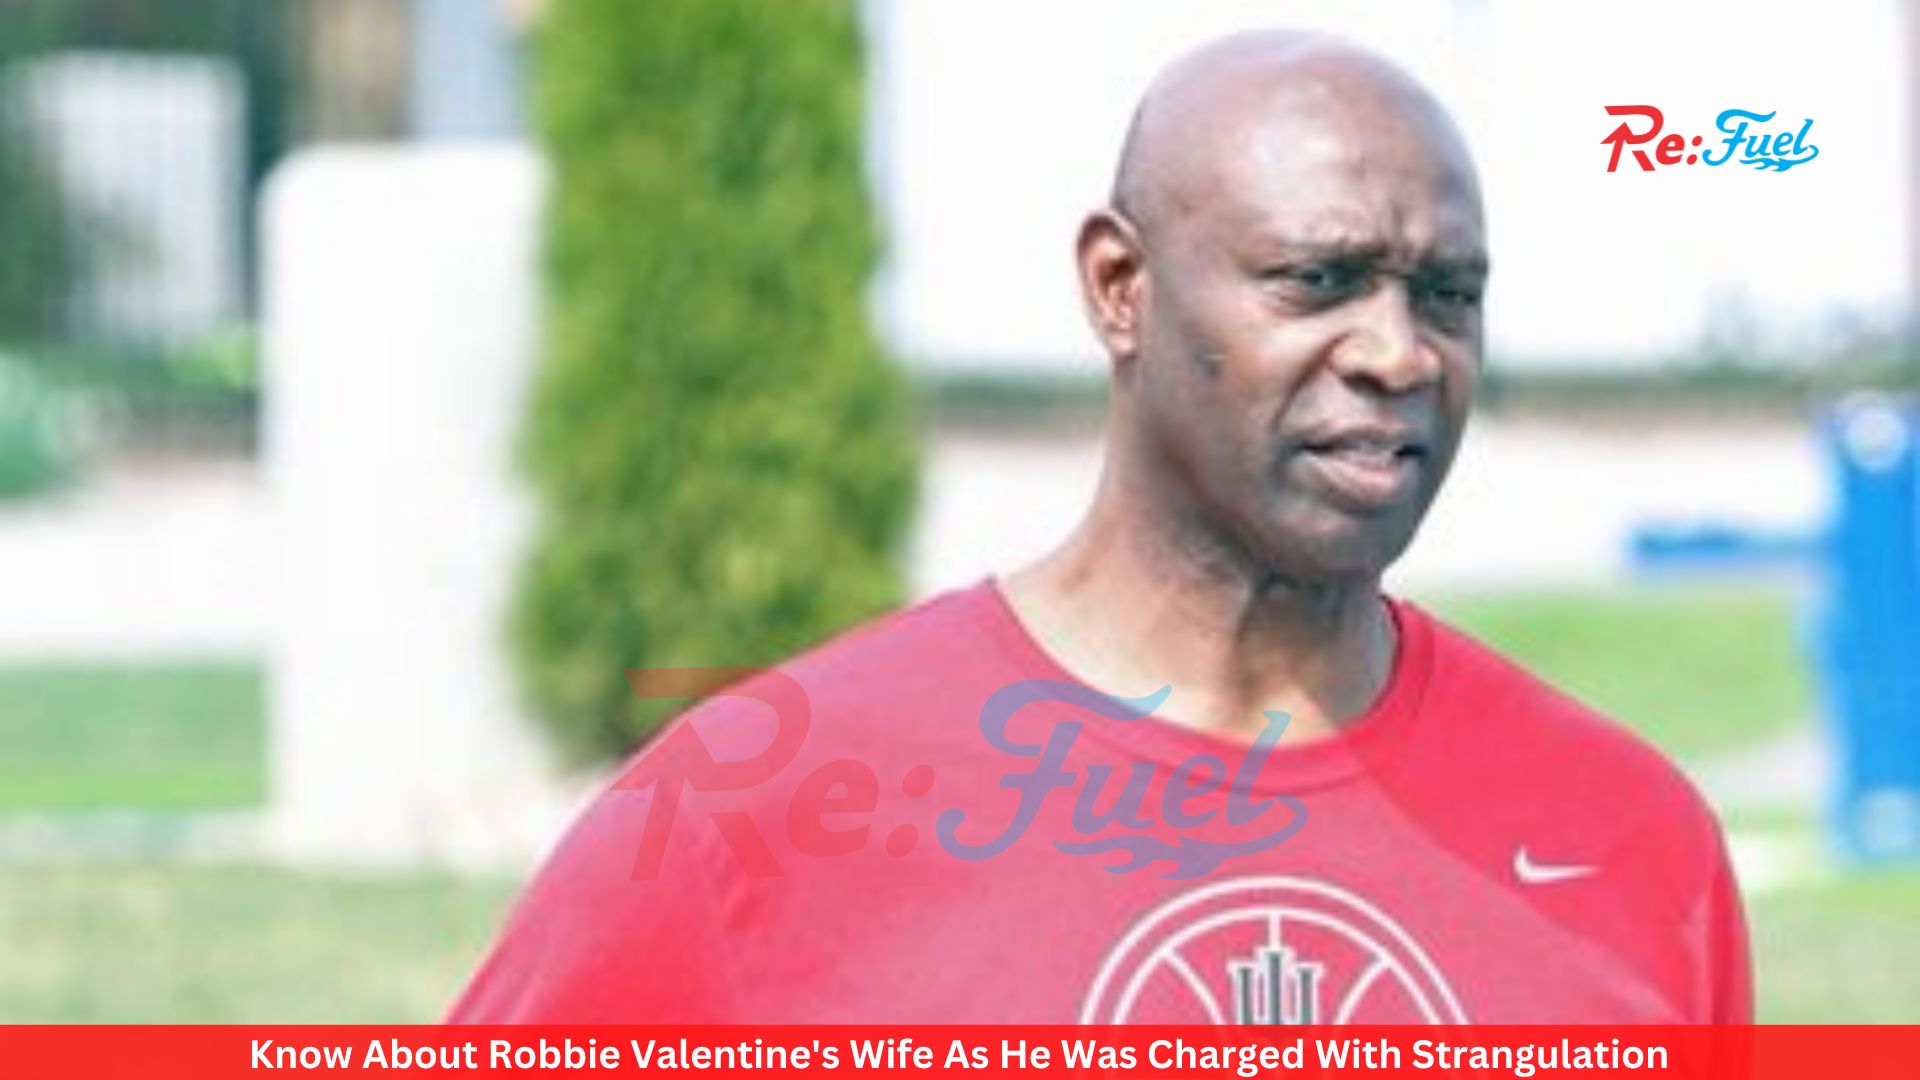 Know About Robbie Valentine's Wife As He Was Charged With Strangulation